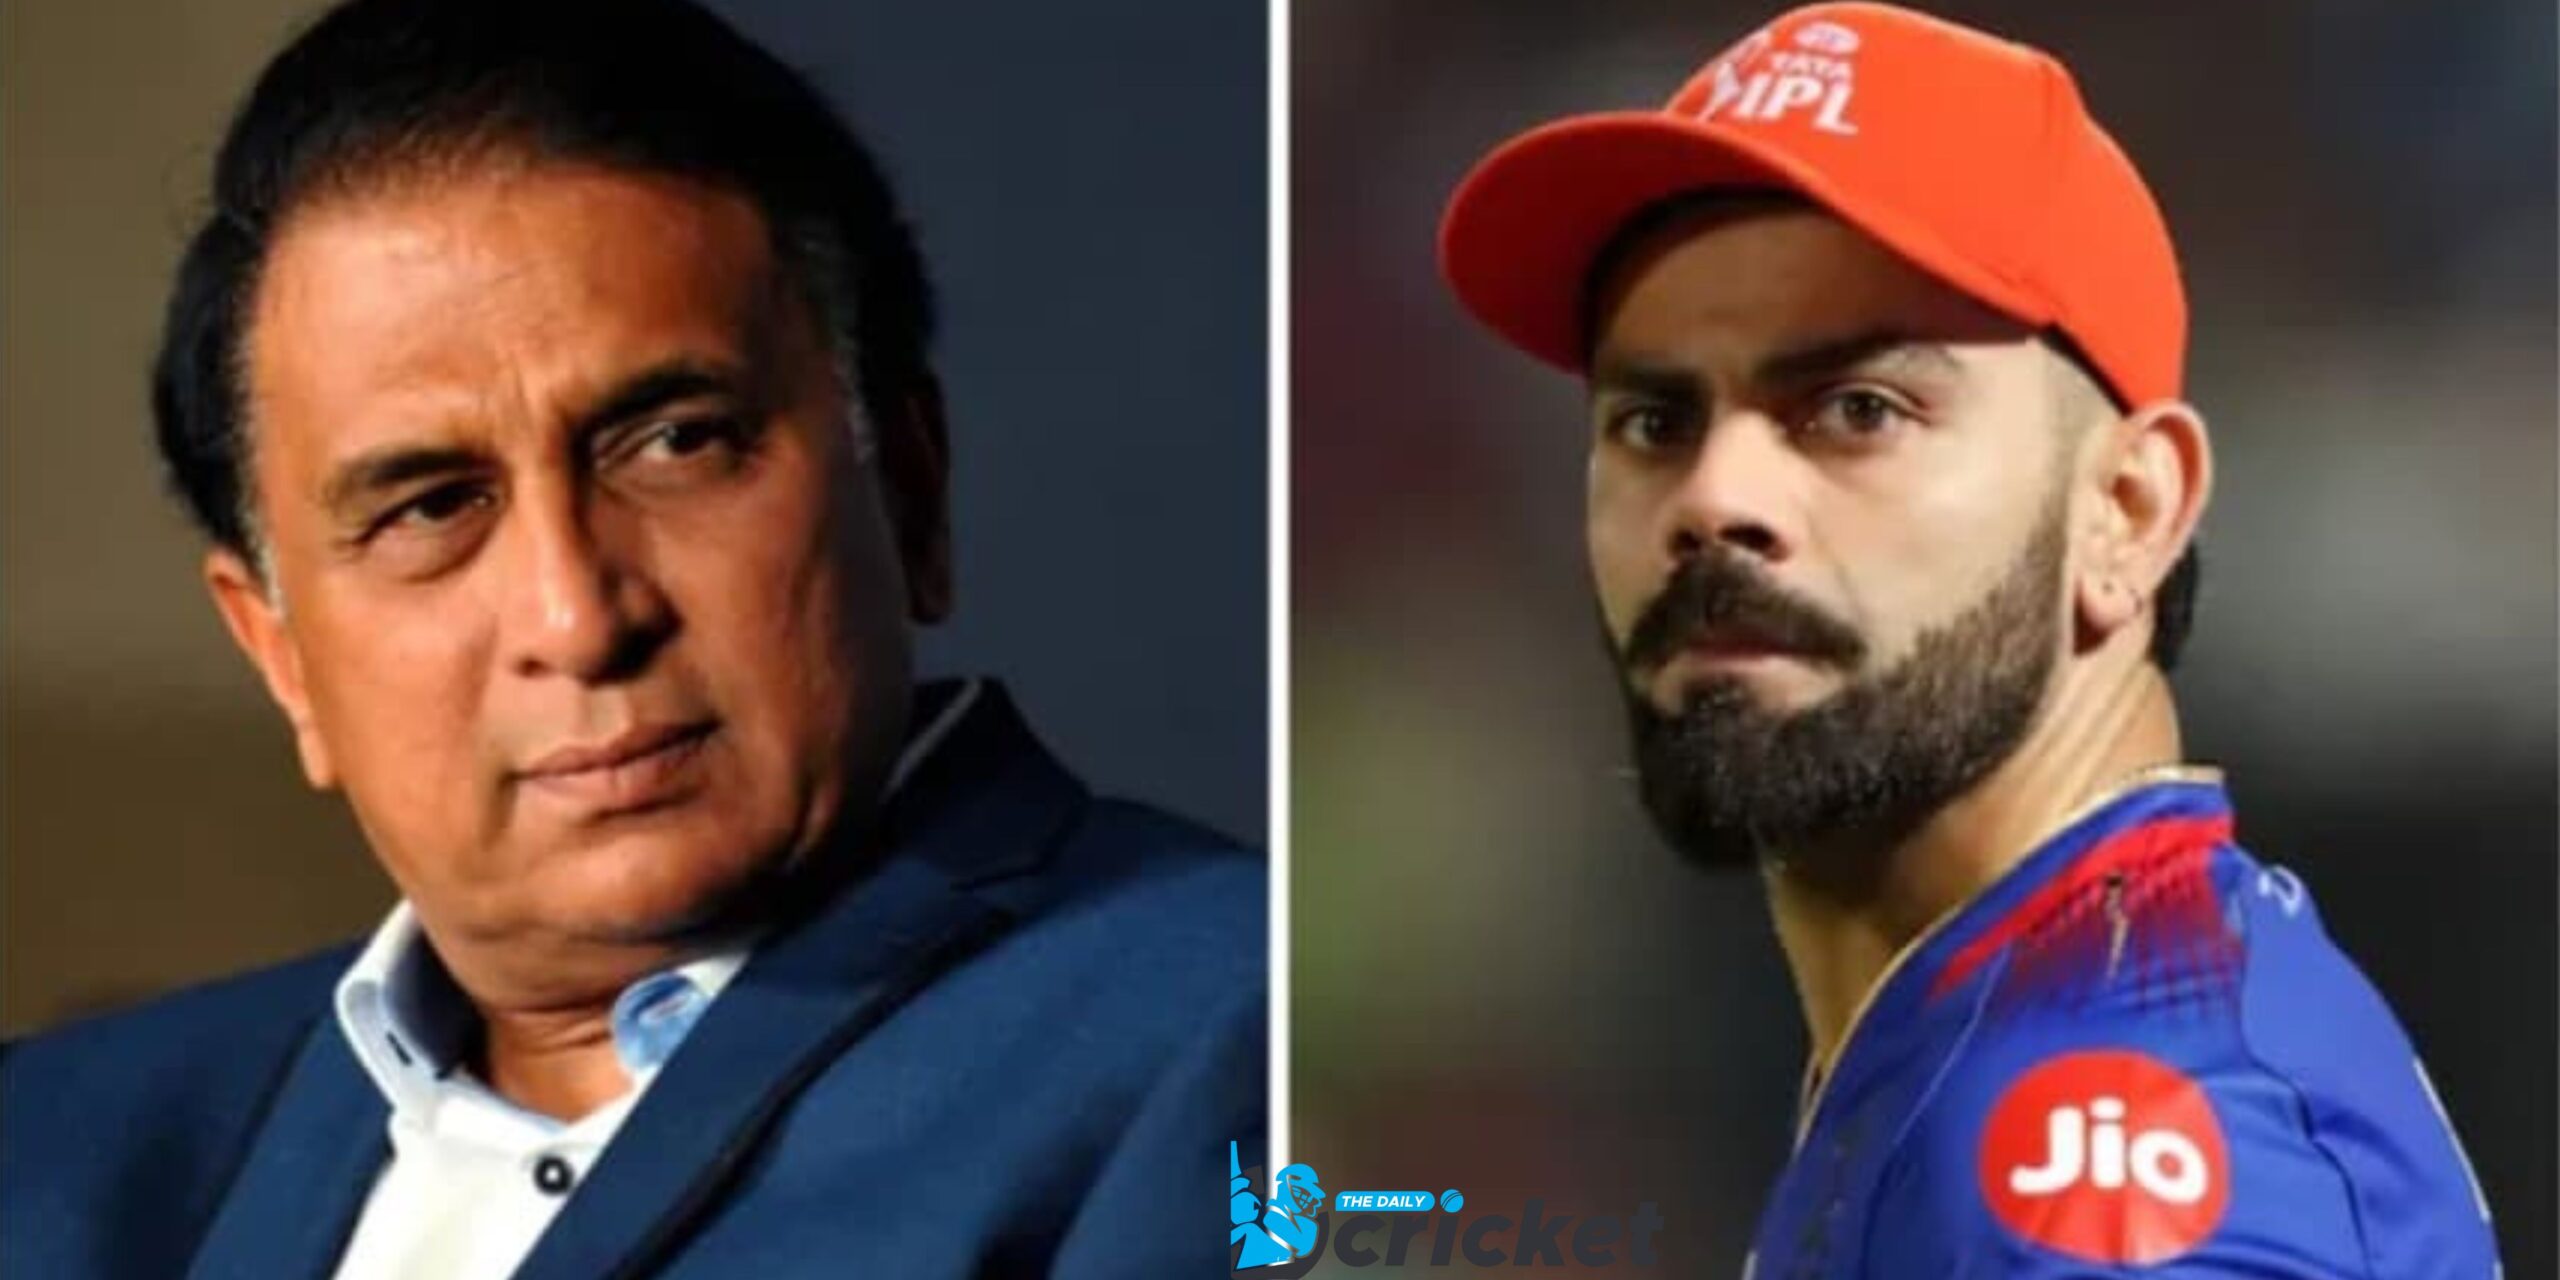 Sunil Gavaskar predicts the RCB vs RR IPL eliminator will be one-sided, saying this team "will walk all over"